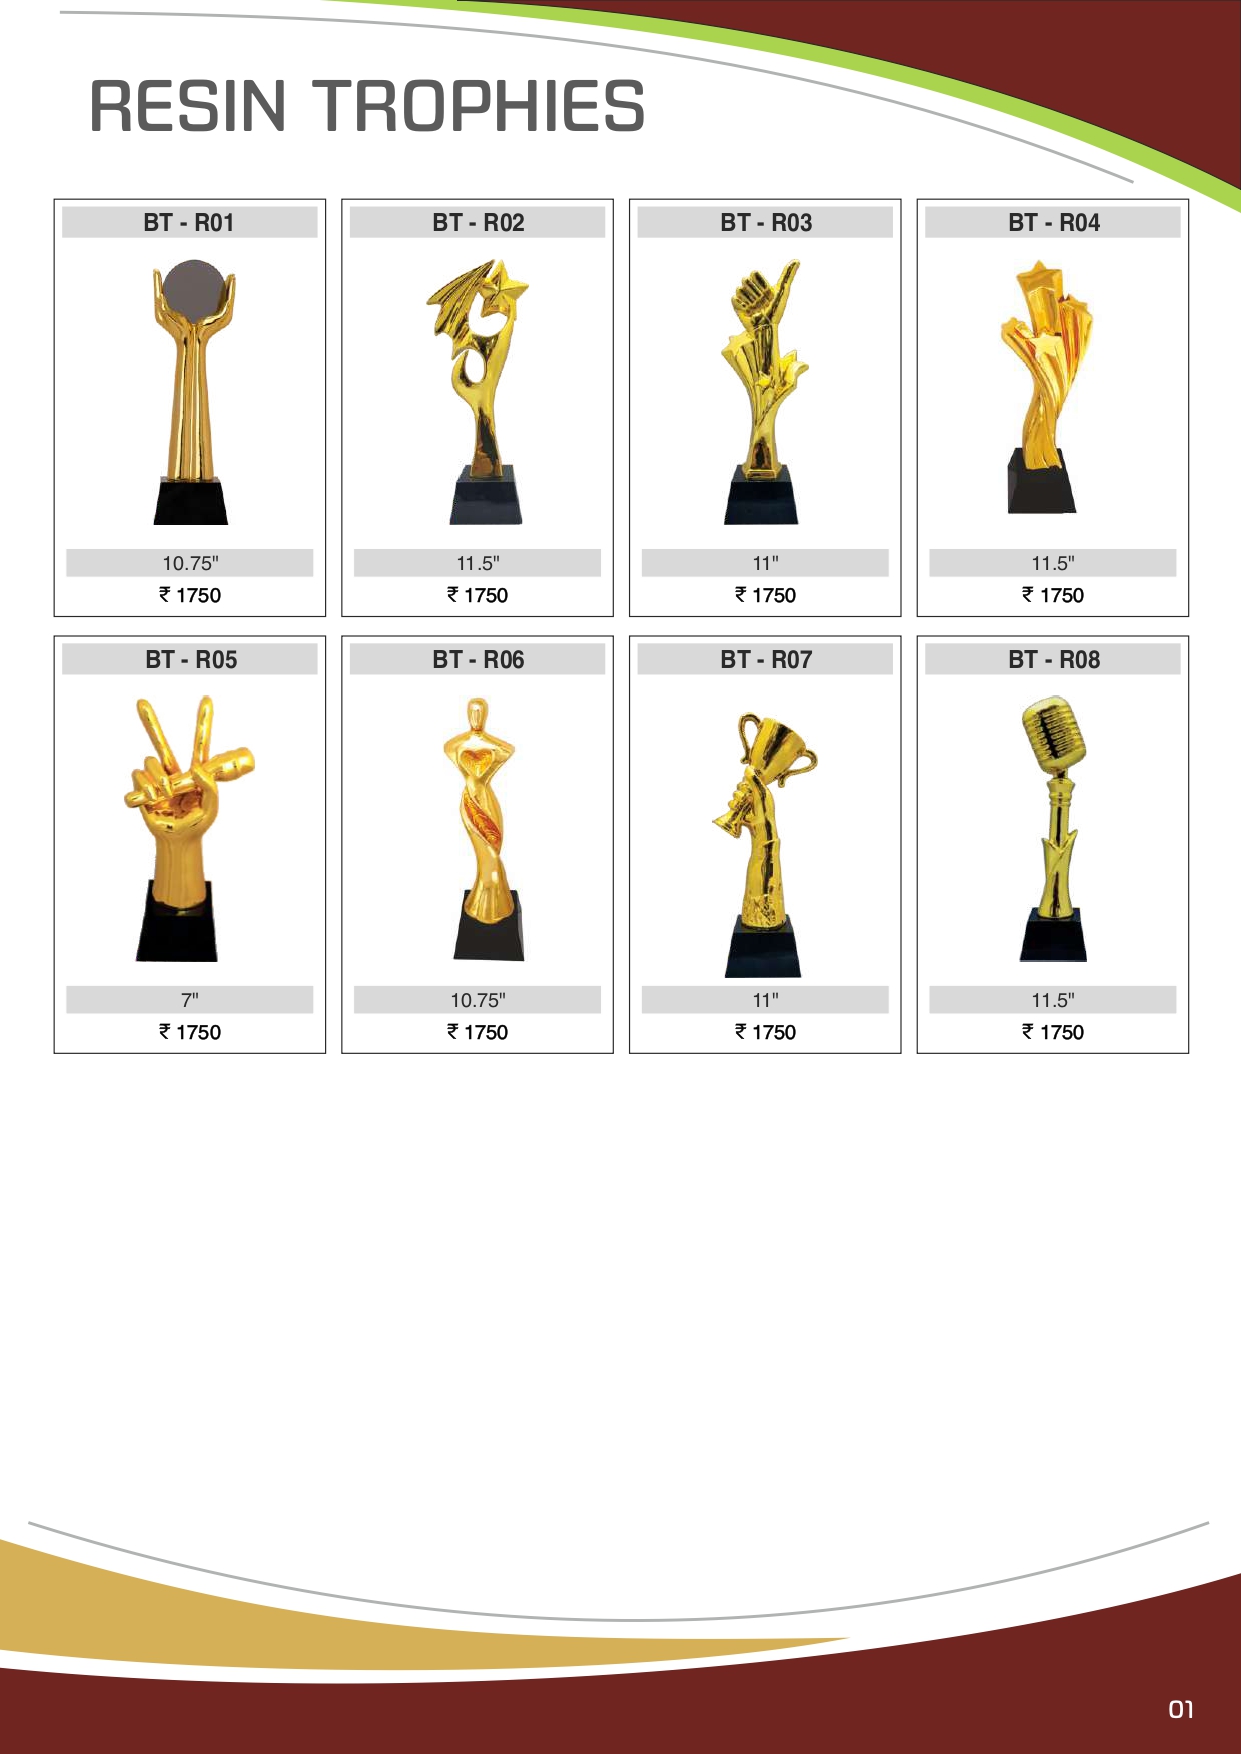 Saga Sports And Trophies - Service - Resin Trophies